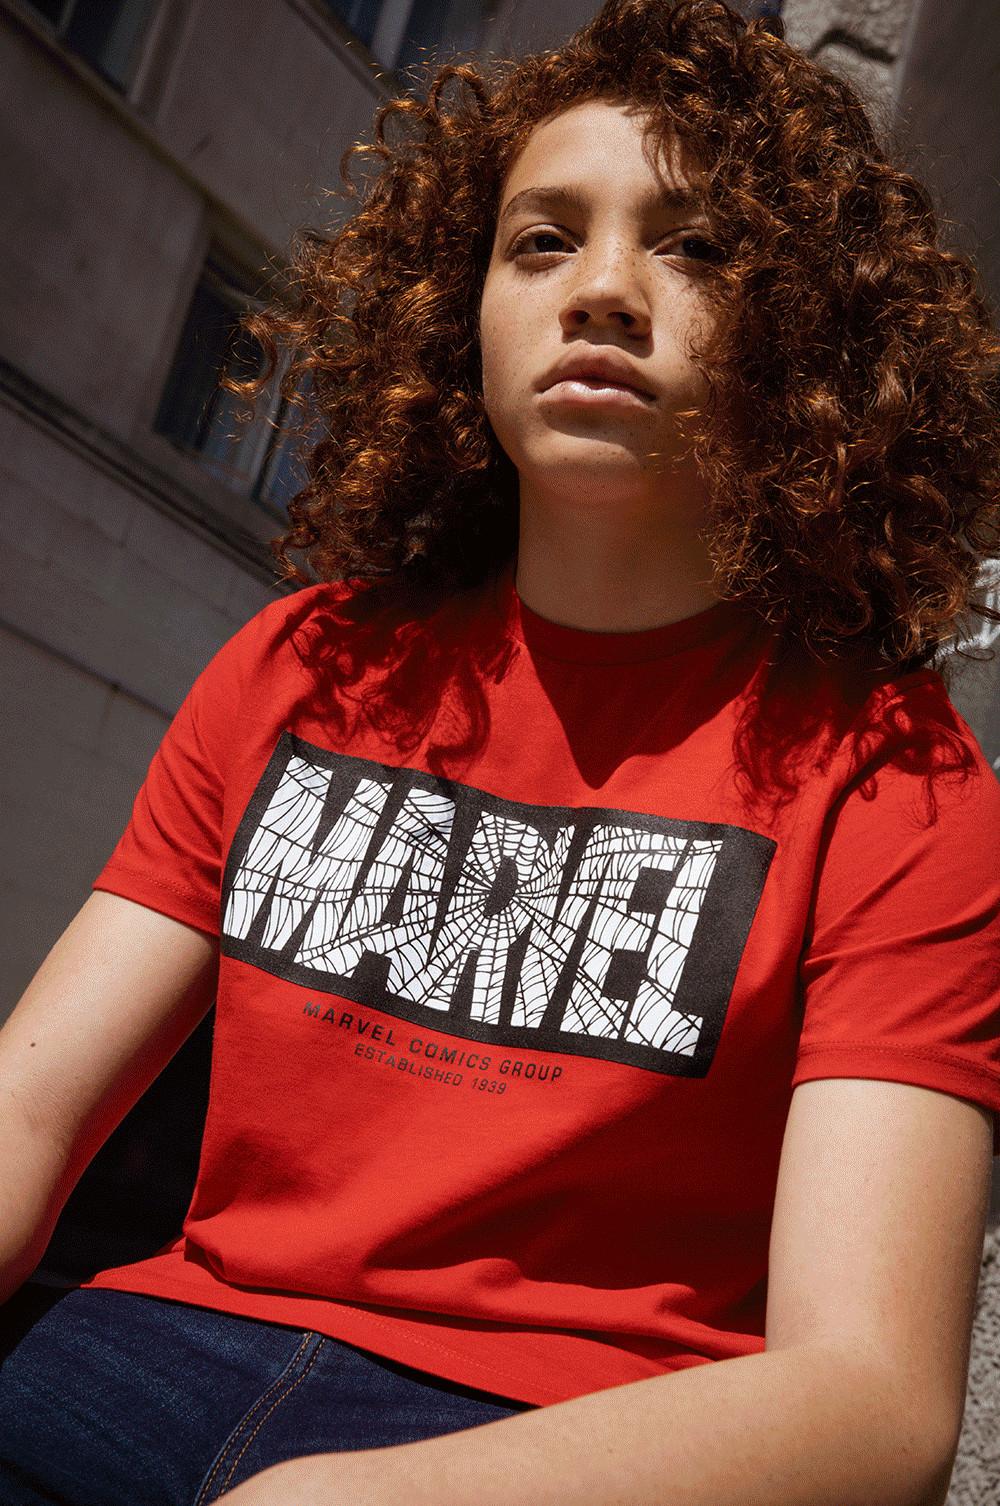 Marvel at Primark: The Kids' Collection